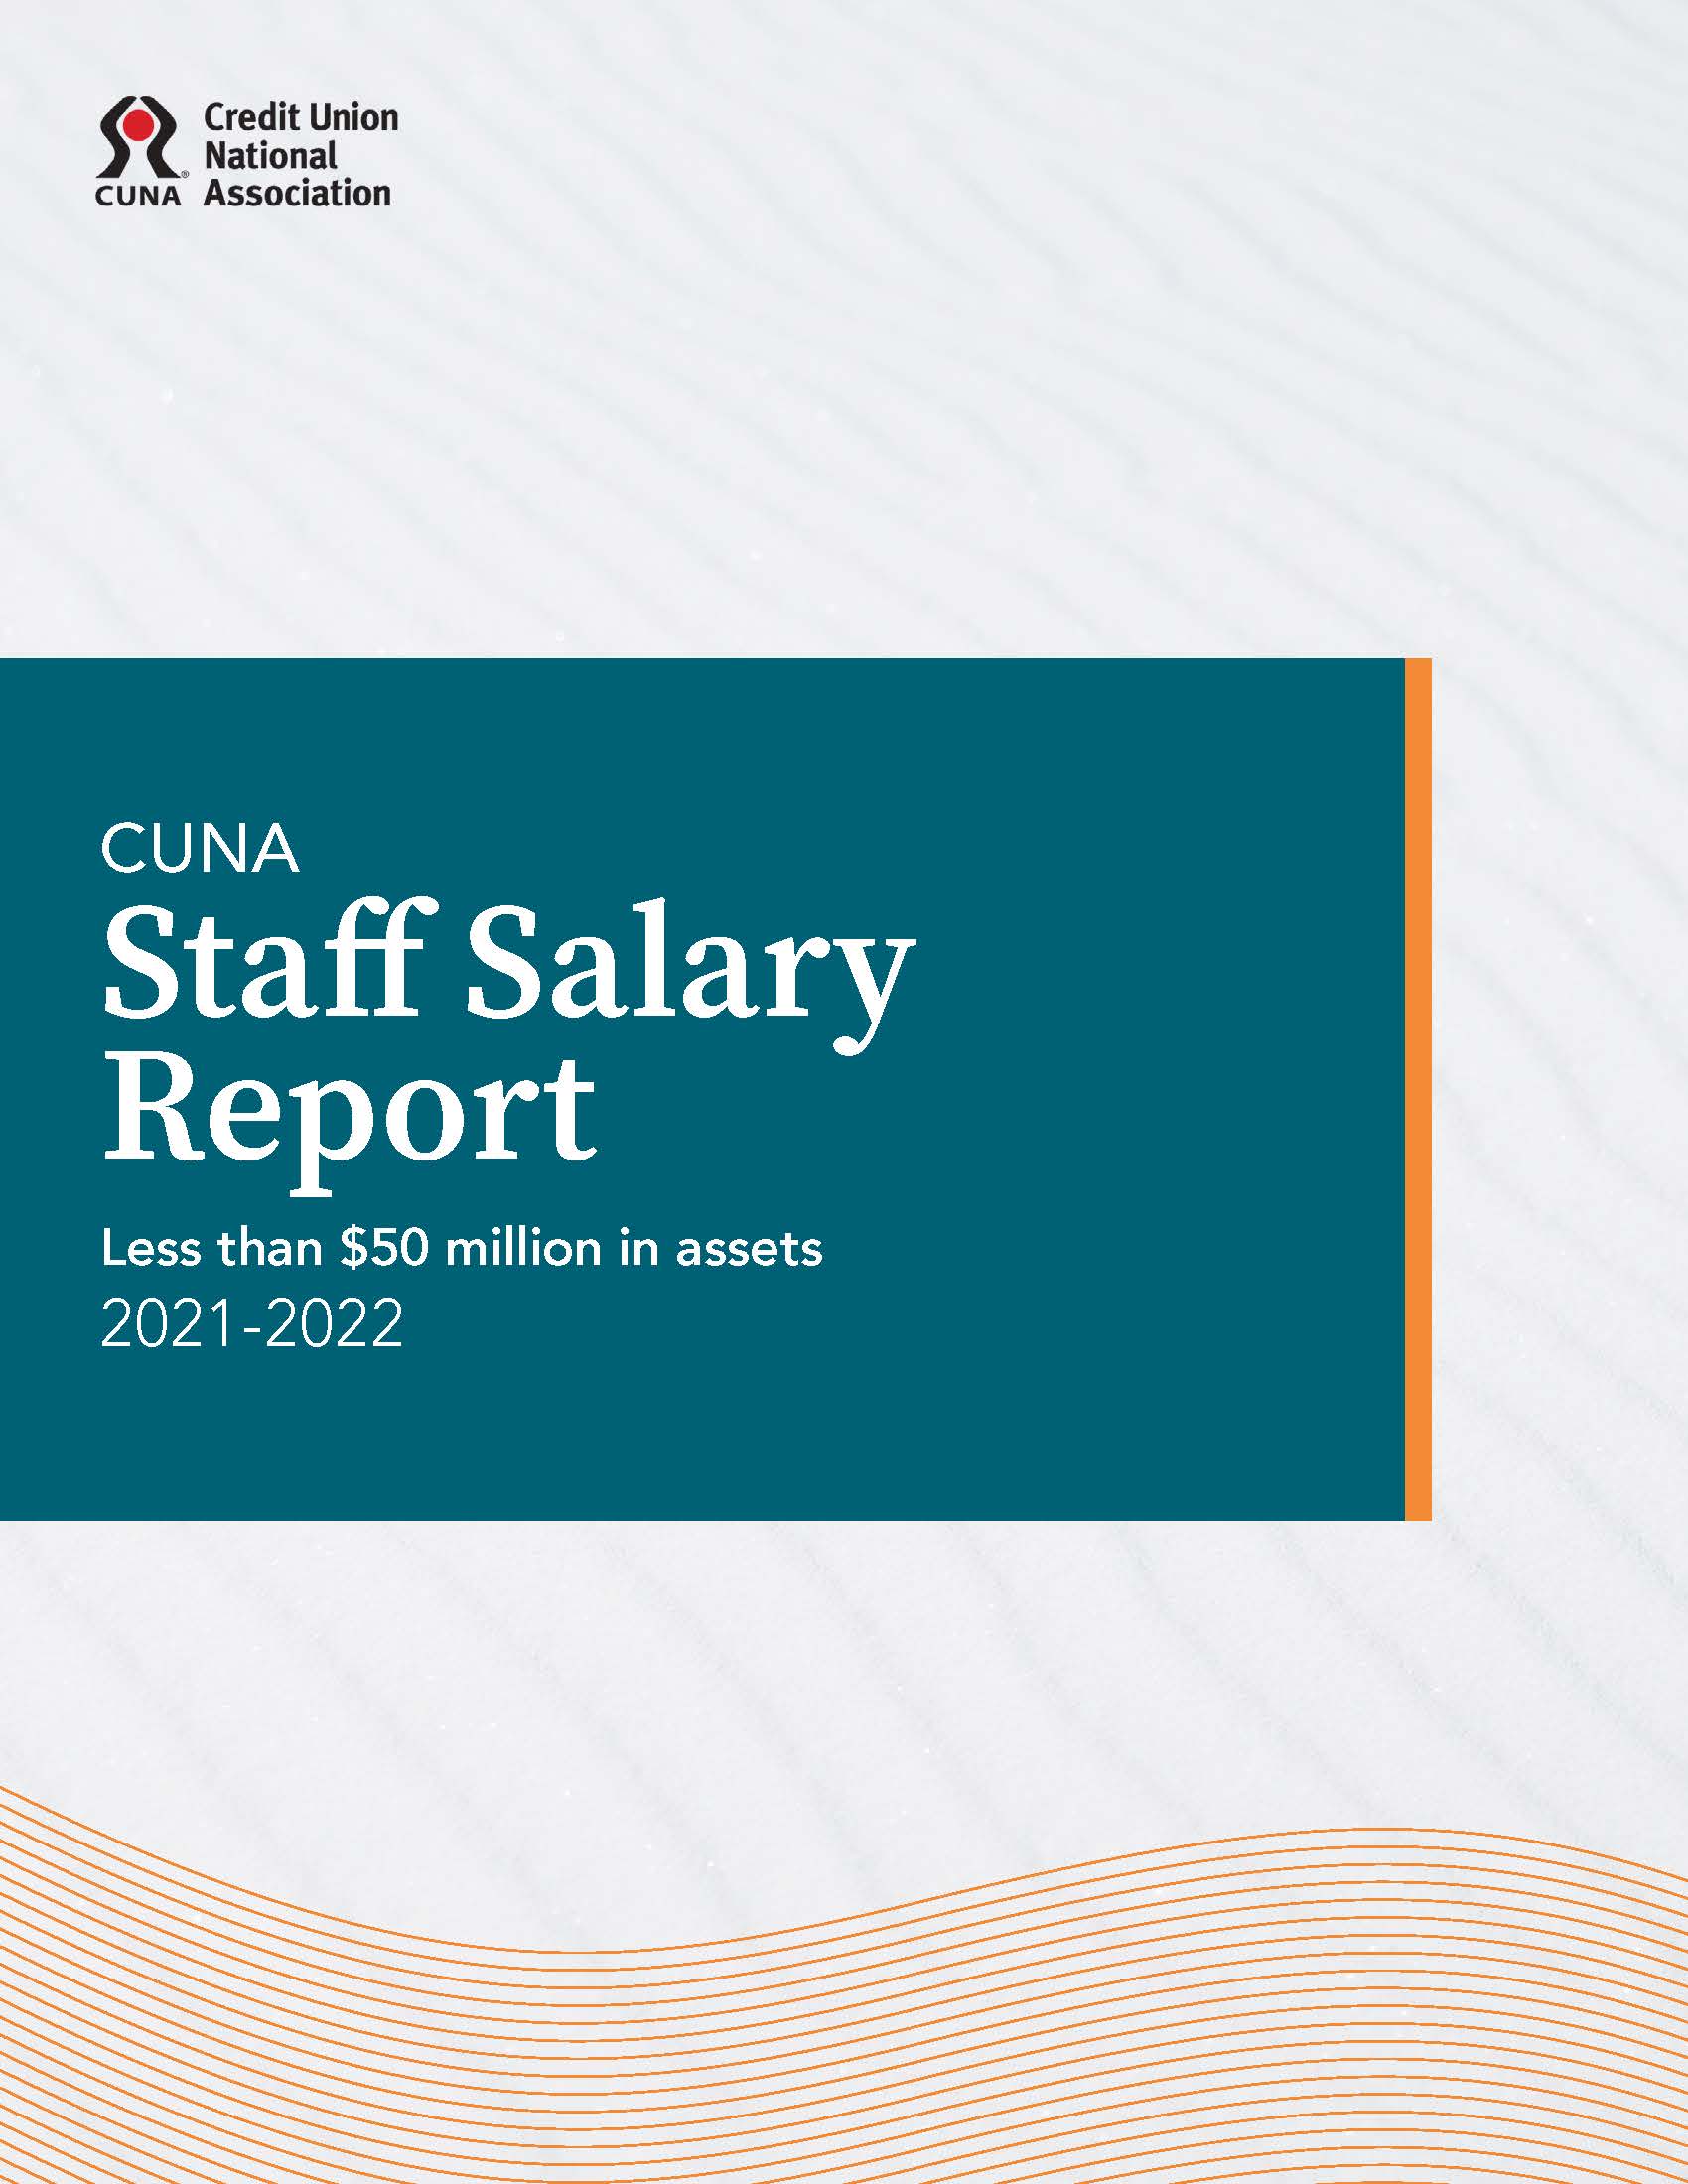 Download your free Staff Salary Report!